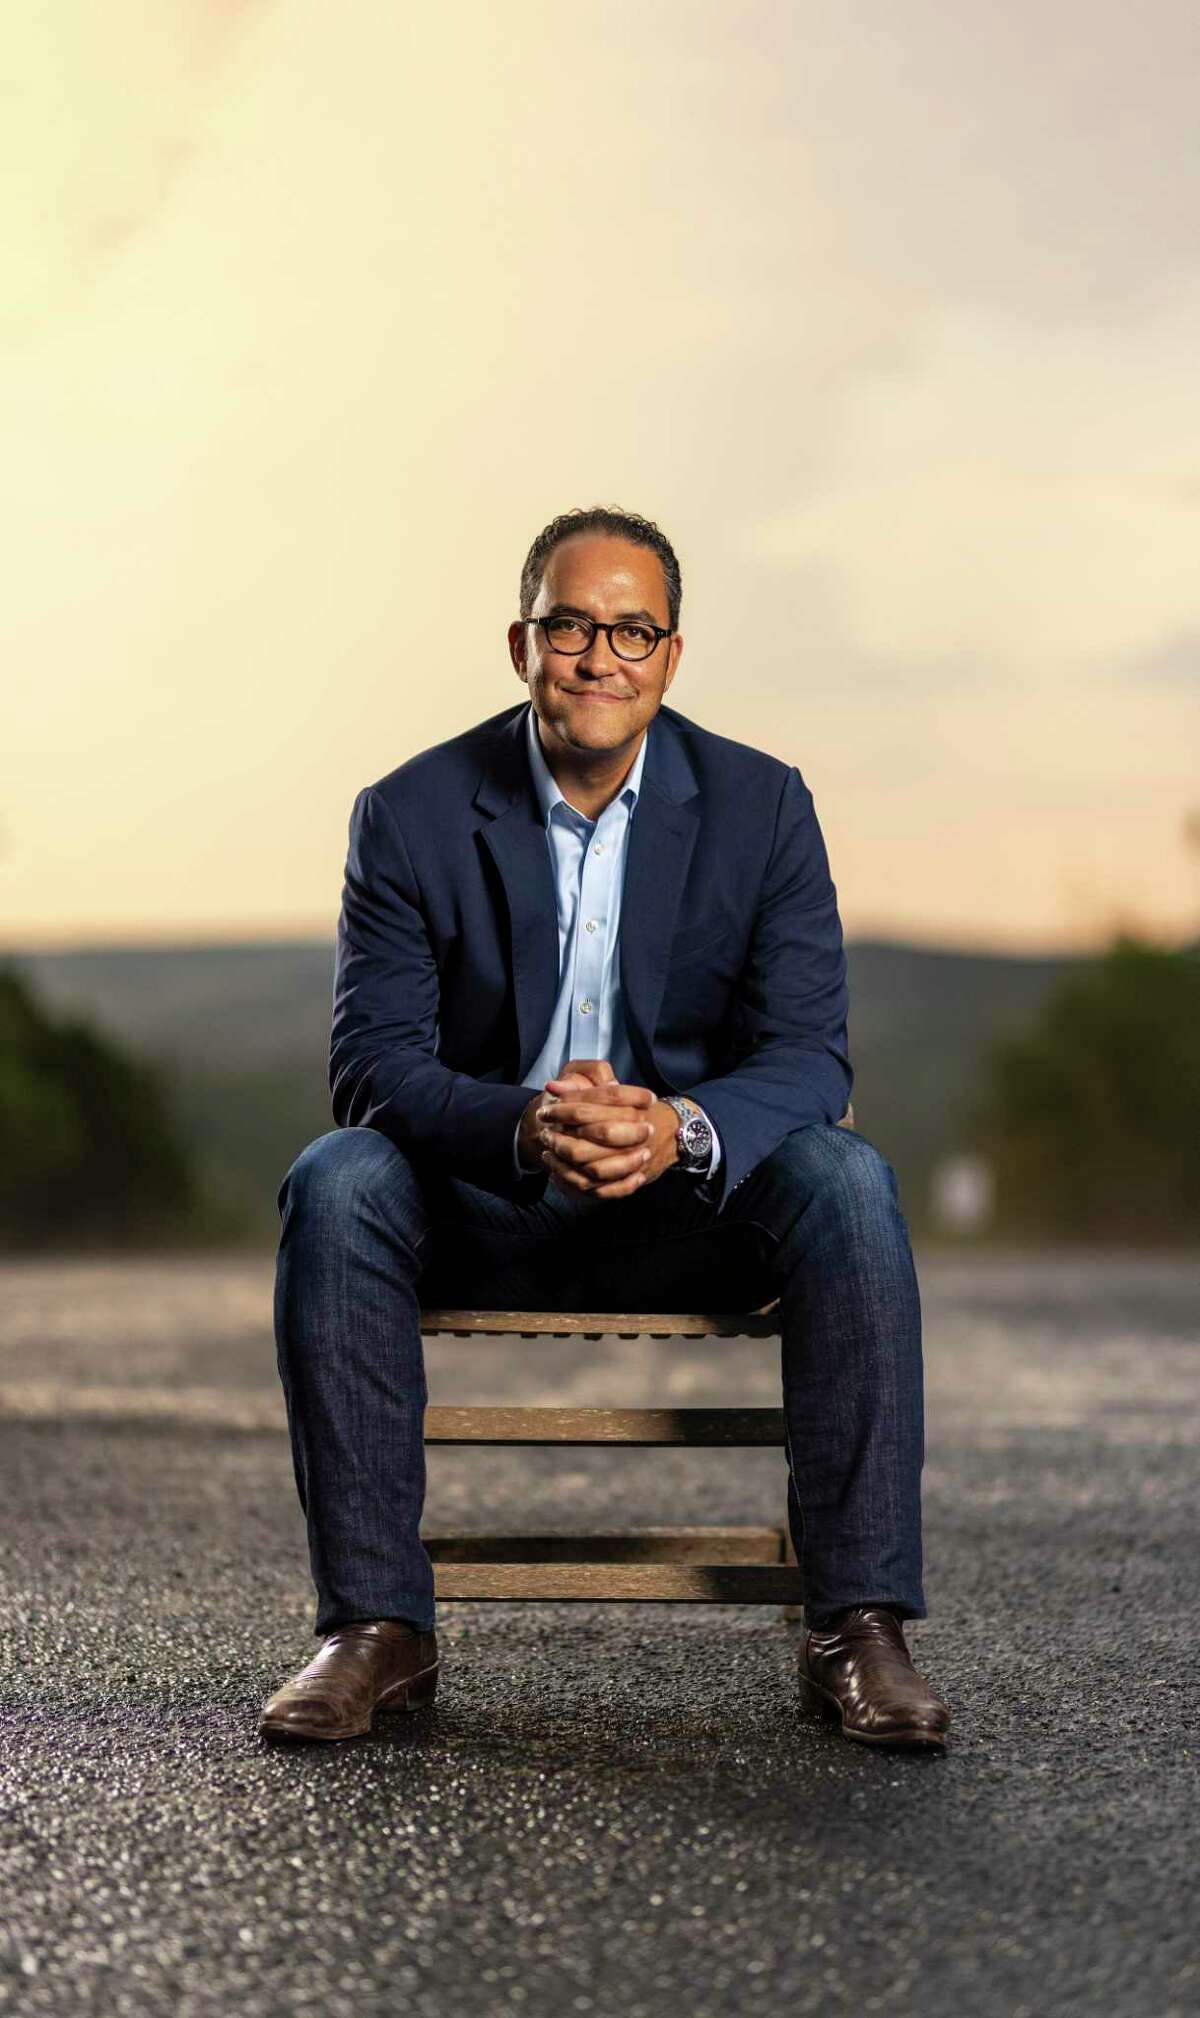 Former Congressman Will Hurd’s new book, “American Reboot,” offers prescriptions for an ailing political system.